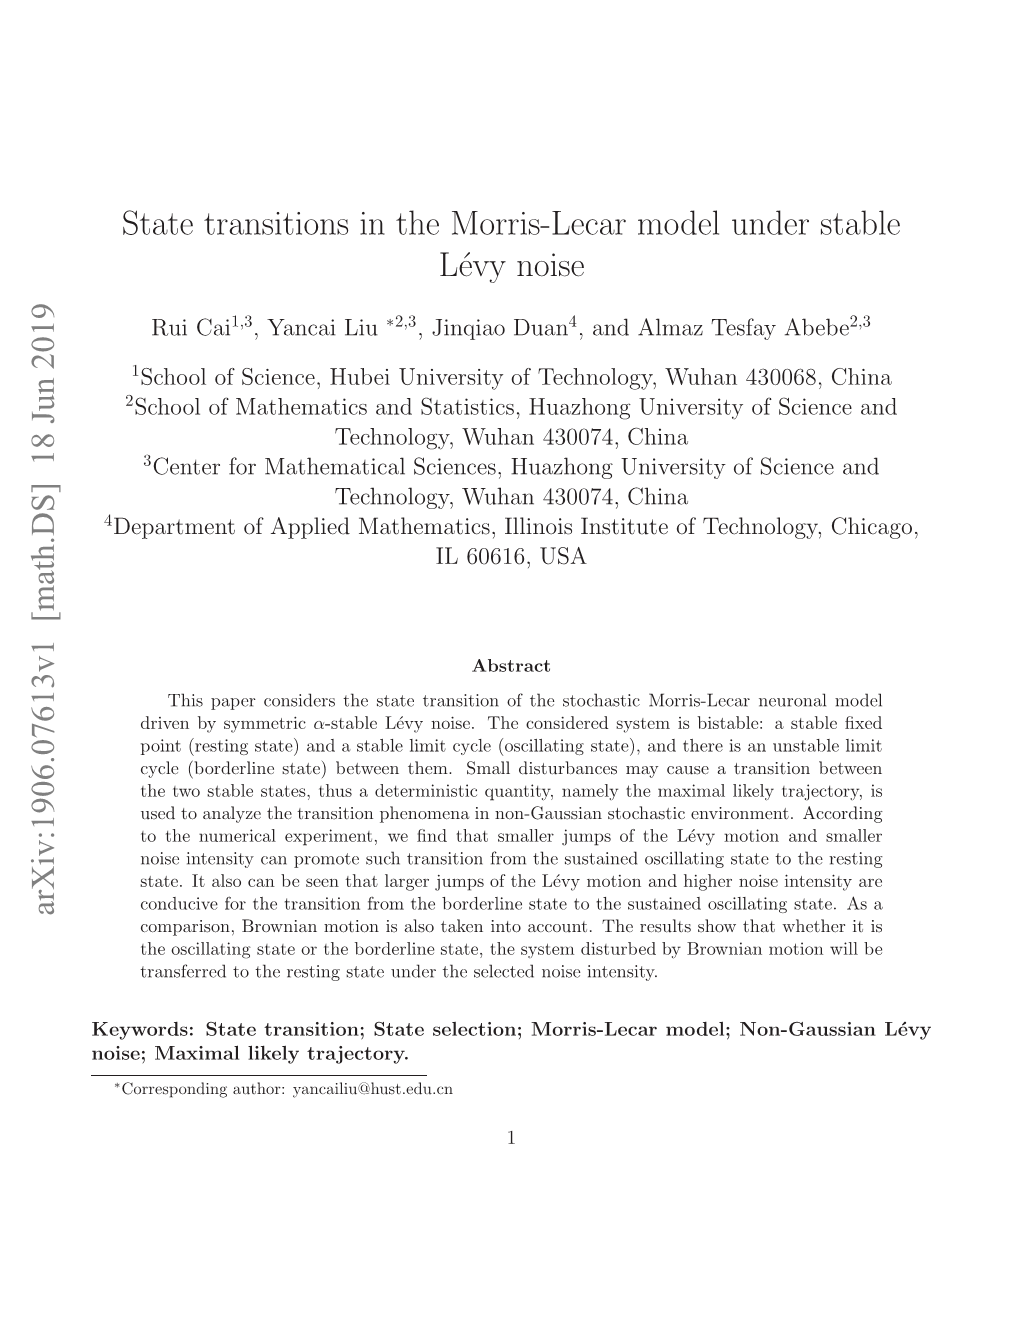 State Transitions in the Morris-Lecar Model Under Stable L\'Evy Noise